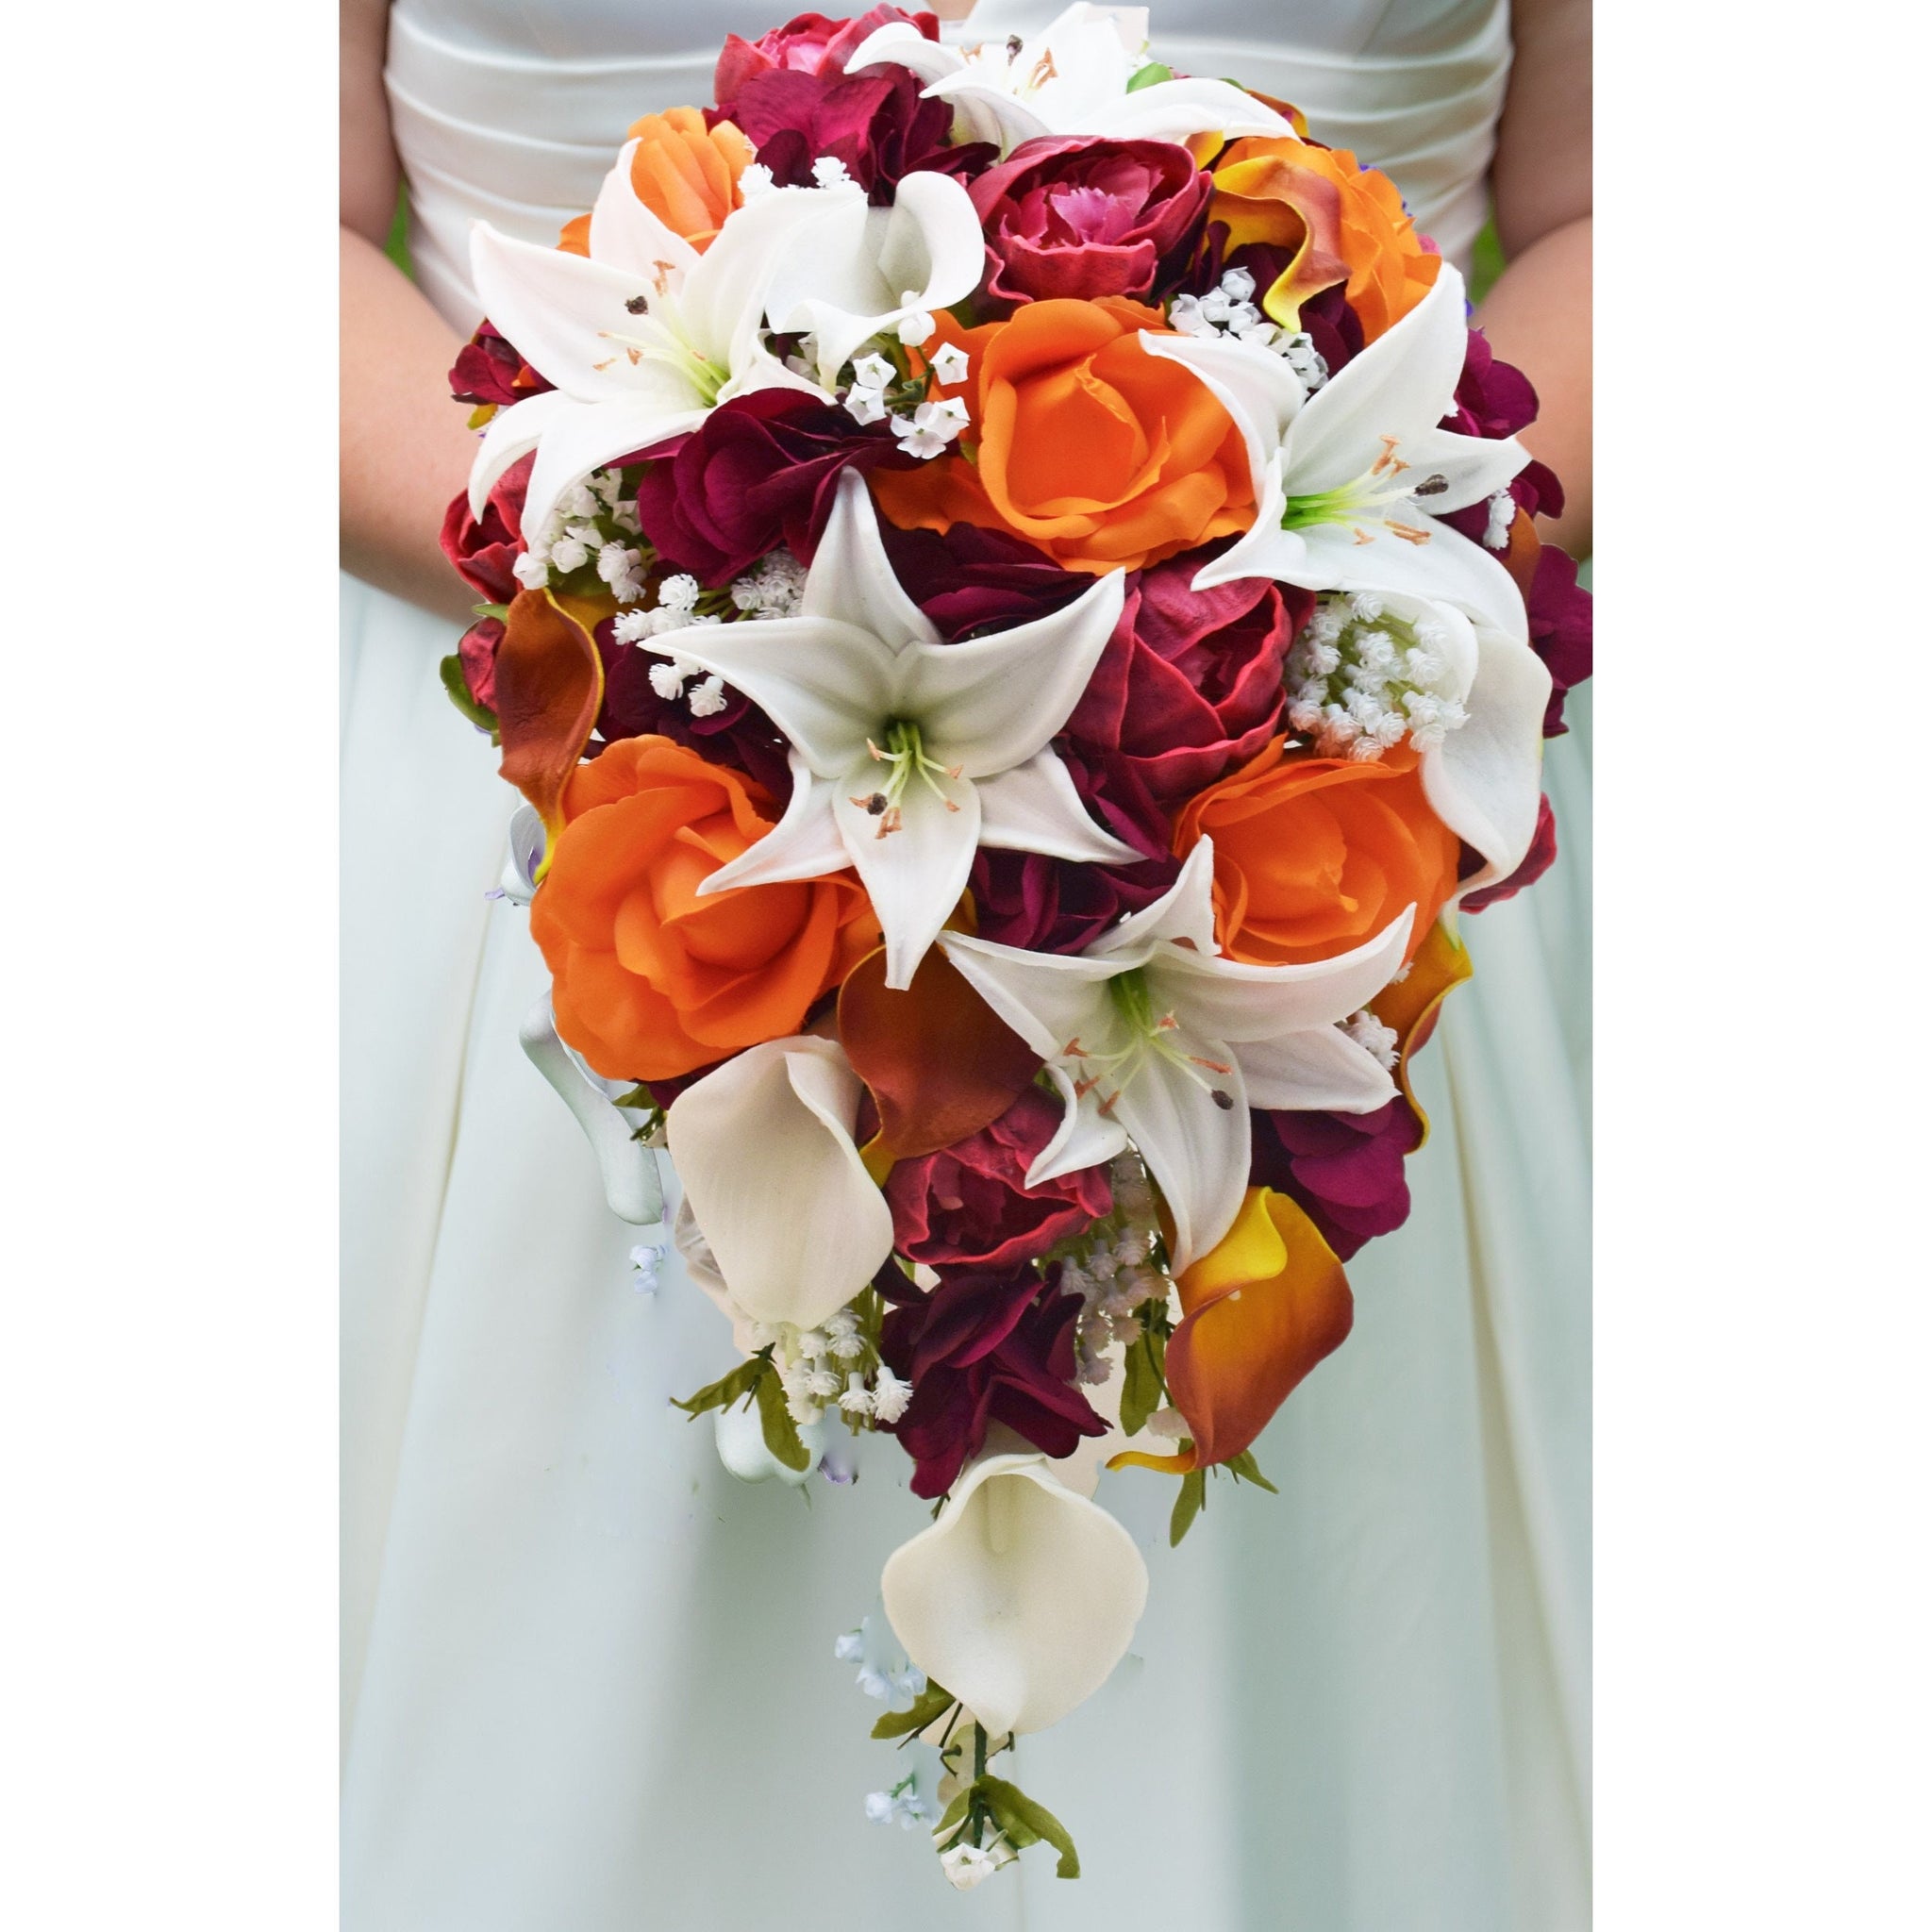 Cascade Fall Wedding Bouquet Orange Real Touch Roses Burgundy Peonies White Tiger Lilies - Add Groom Boutonniere Wedding Arch Flowers & More